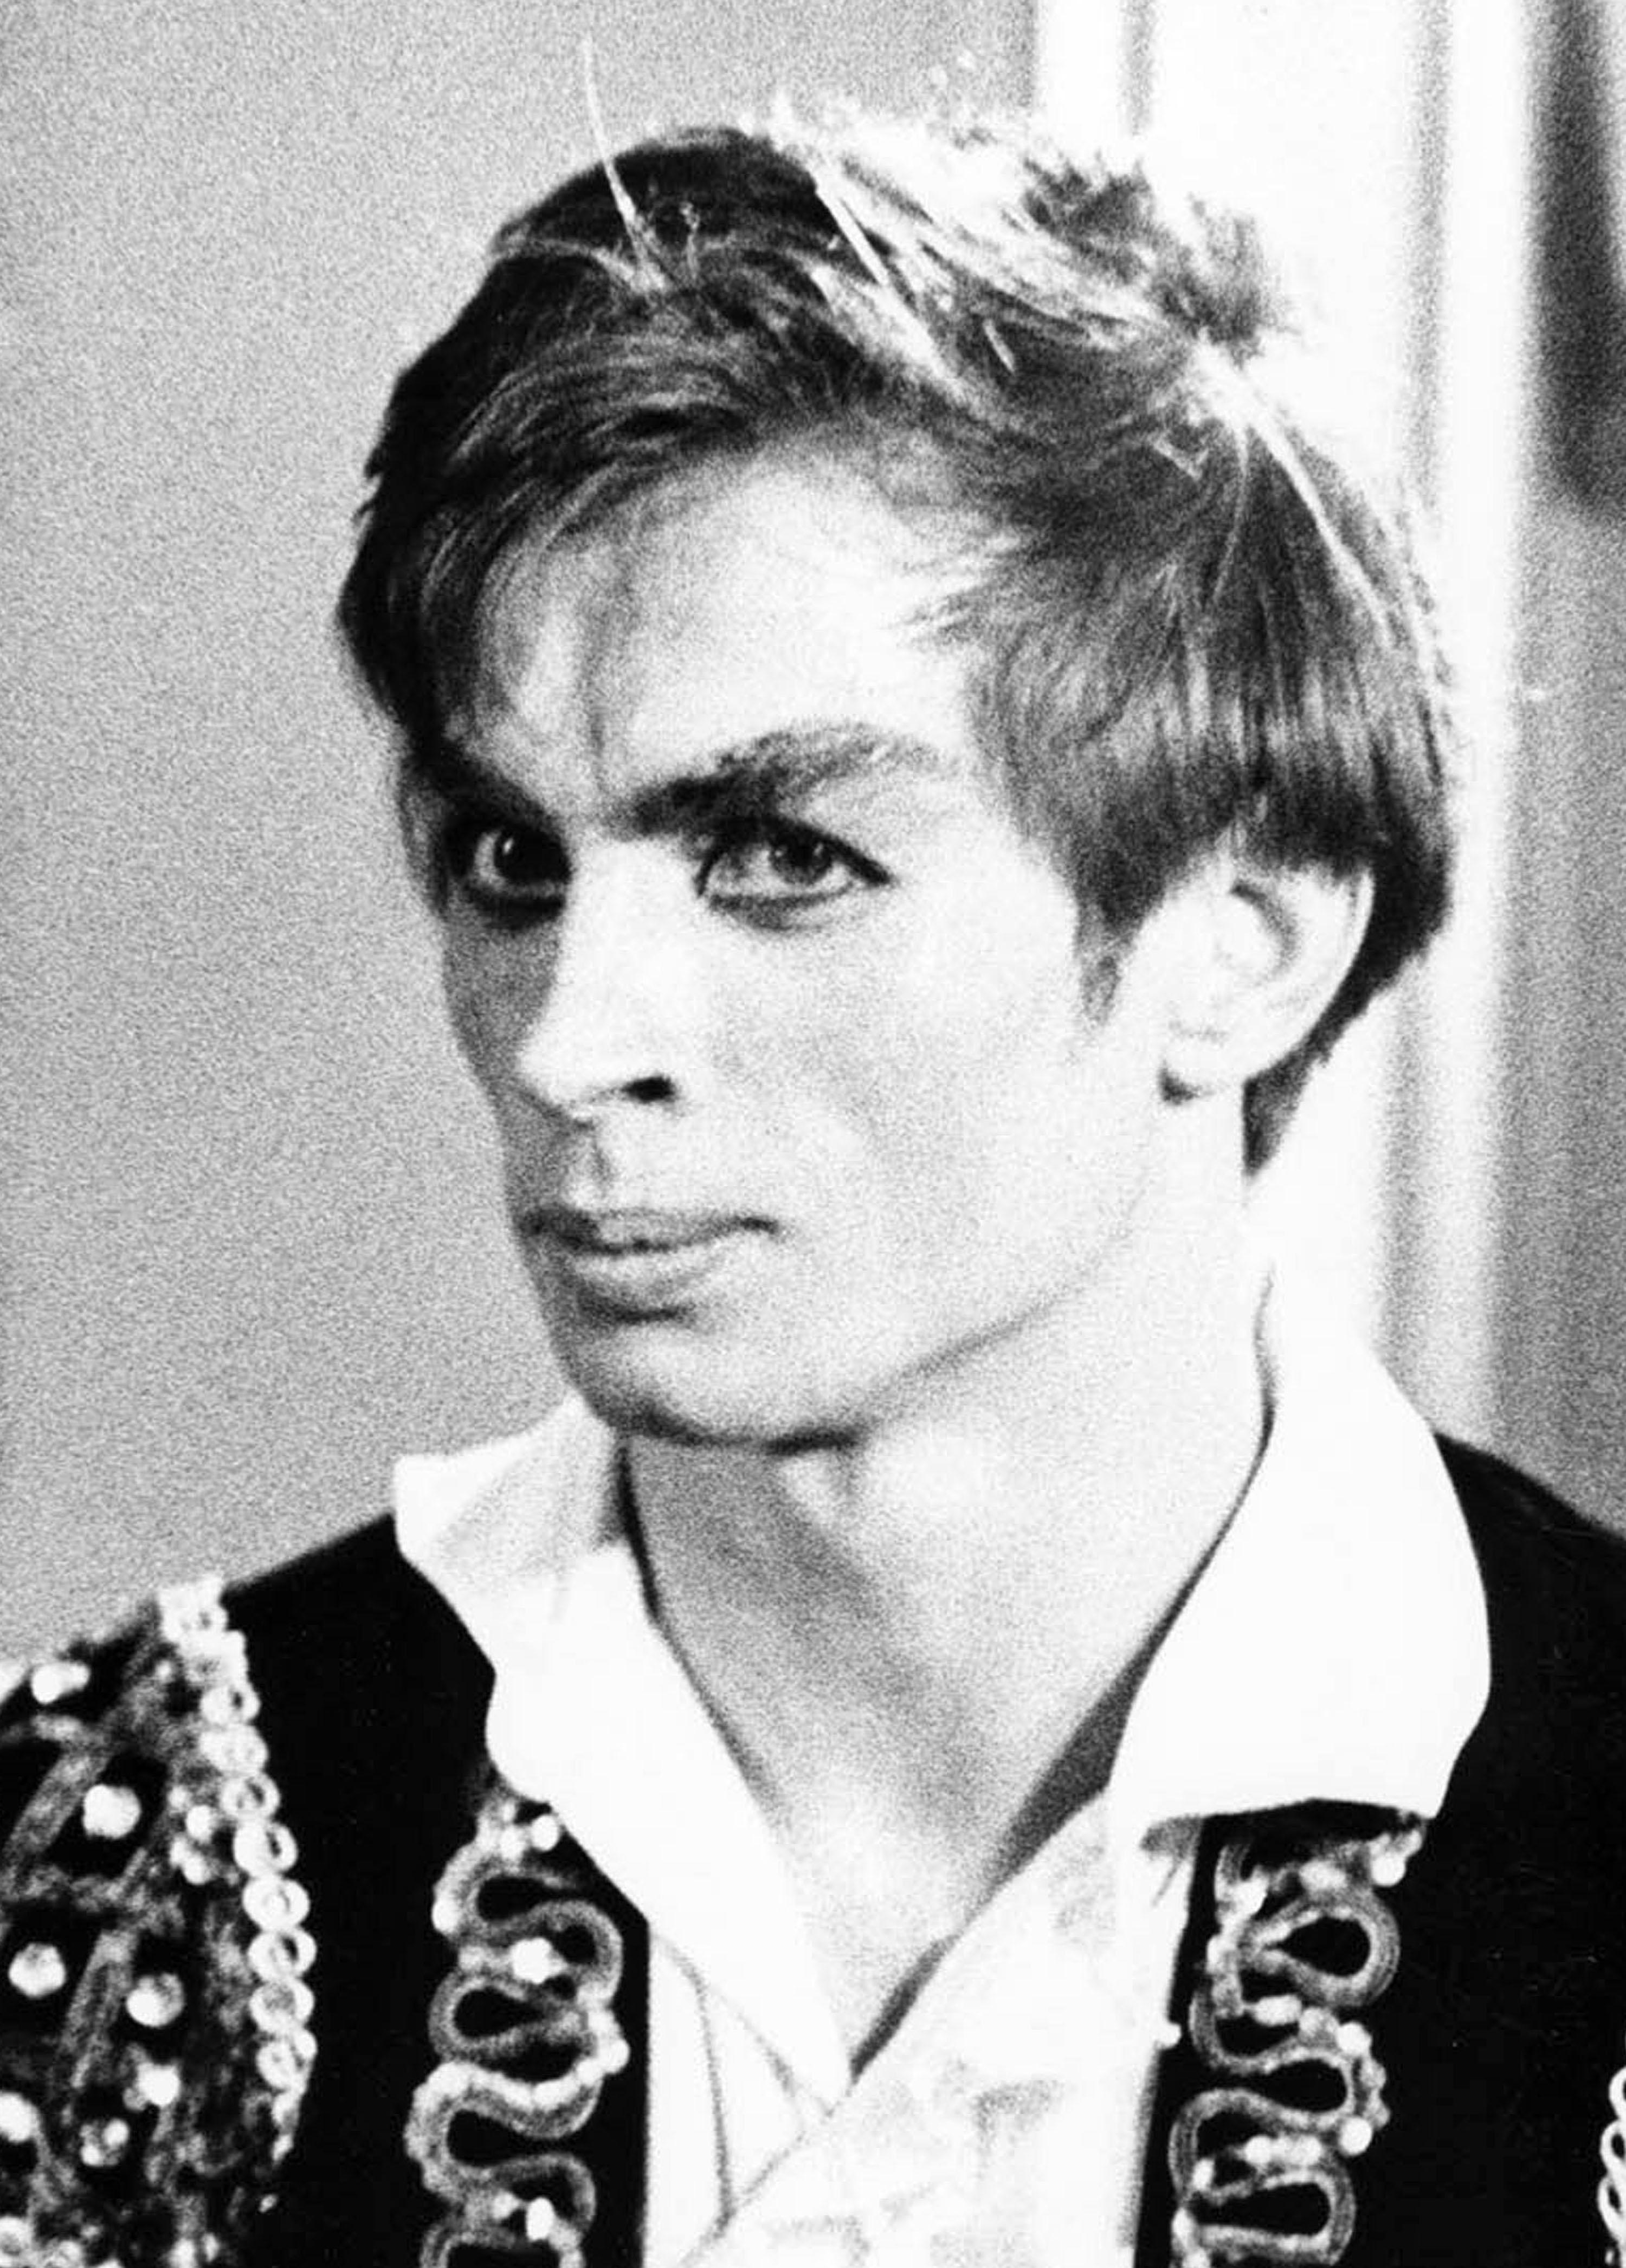 Rudolf Nureyev photographed just after his debut performance May 10, 1962. - Photograph by Jack Mitchell